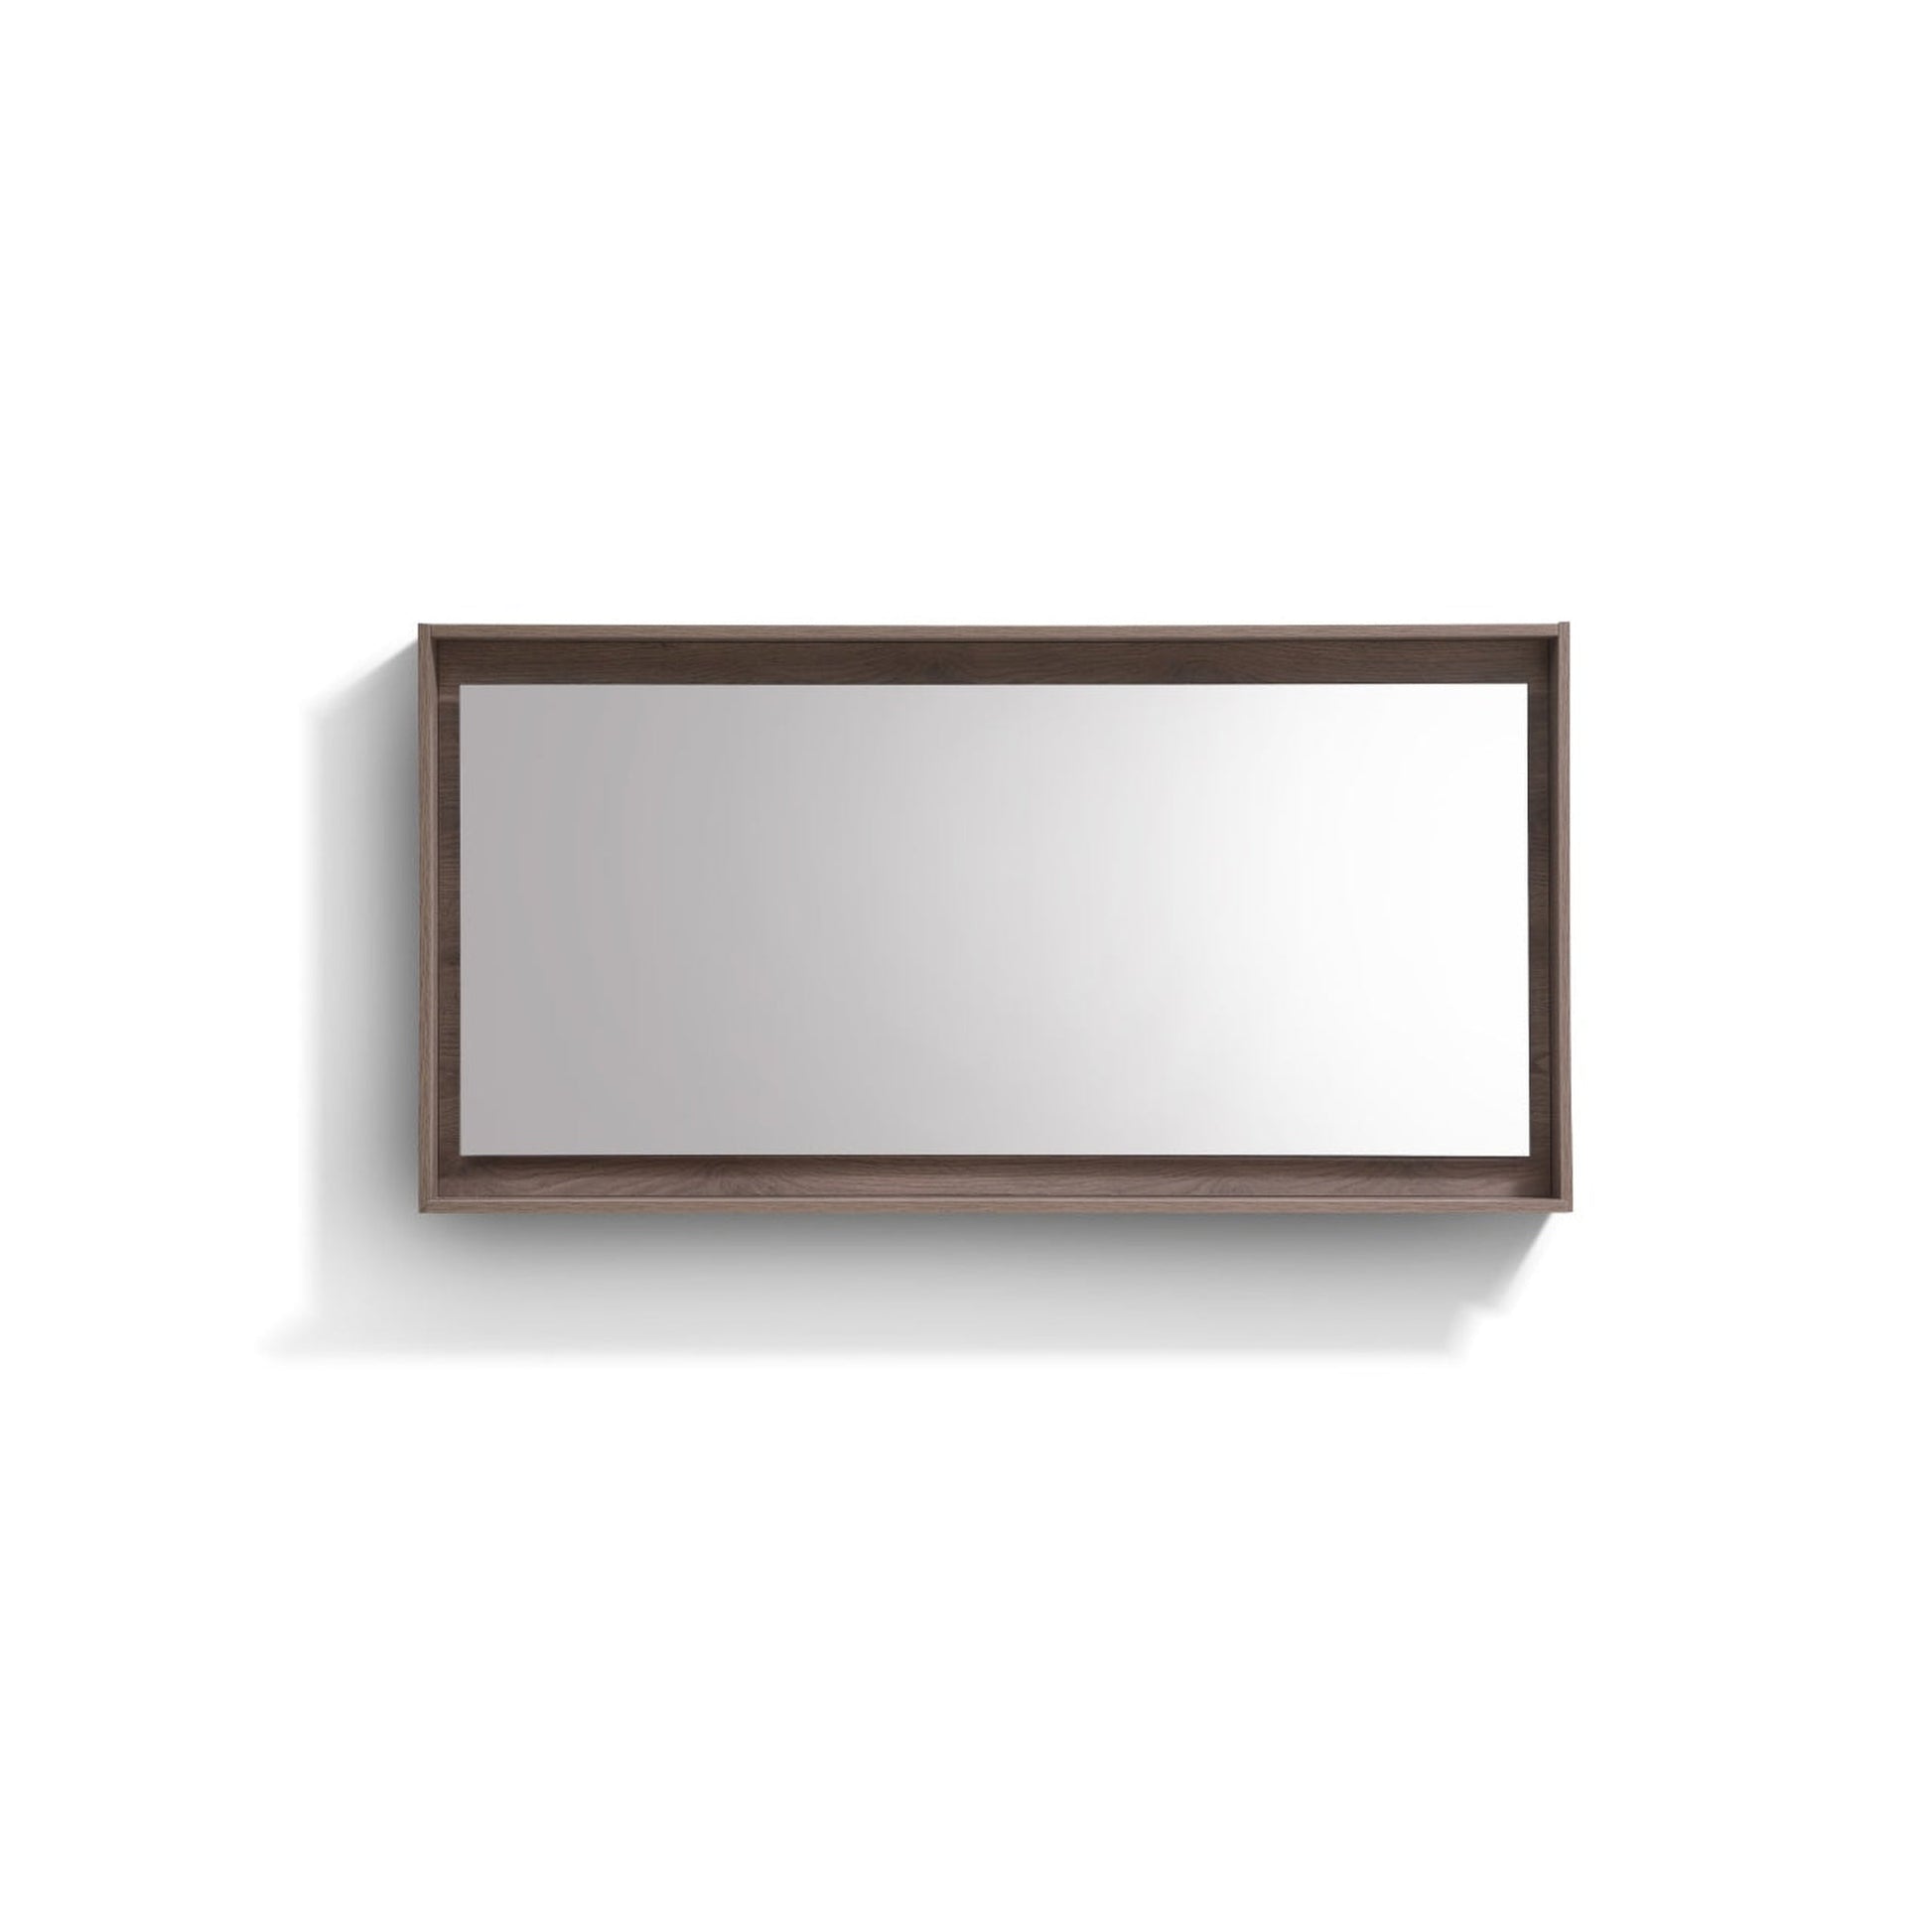 KubeBath Bliss 60" Butternut Wall-Mounted Modern Bathroom Vanity With Single Integrated Acrylic Sink With Overflow and 60" Butternut Framed Mirror With Shelf